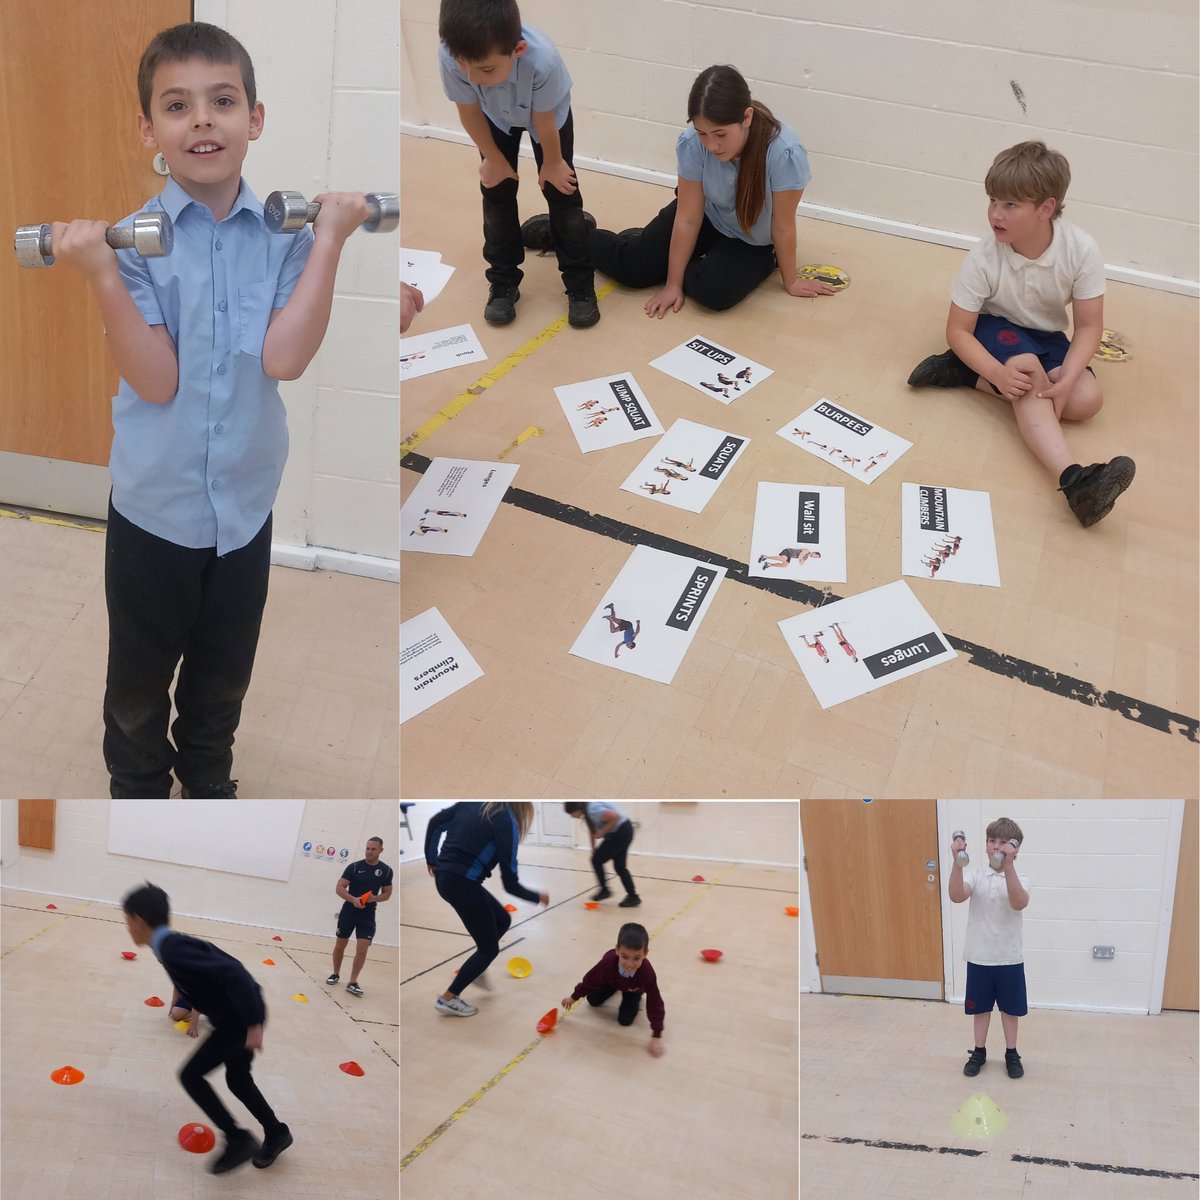 We were extremely proud of the children during our PE lesson today!They all pushed their fitness to a high level,showing great determination and resilience #PE #ThisisAP